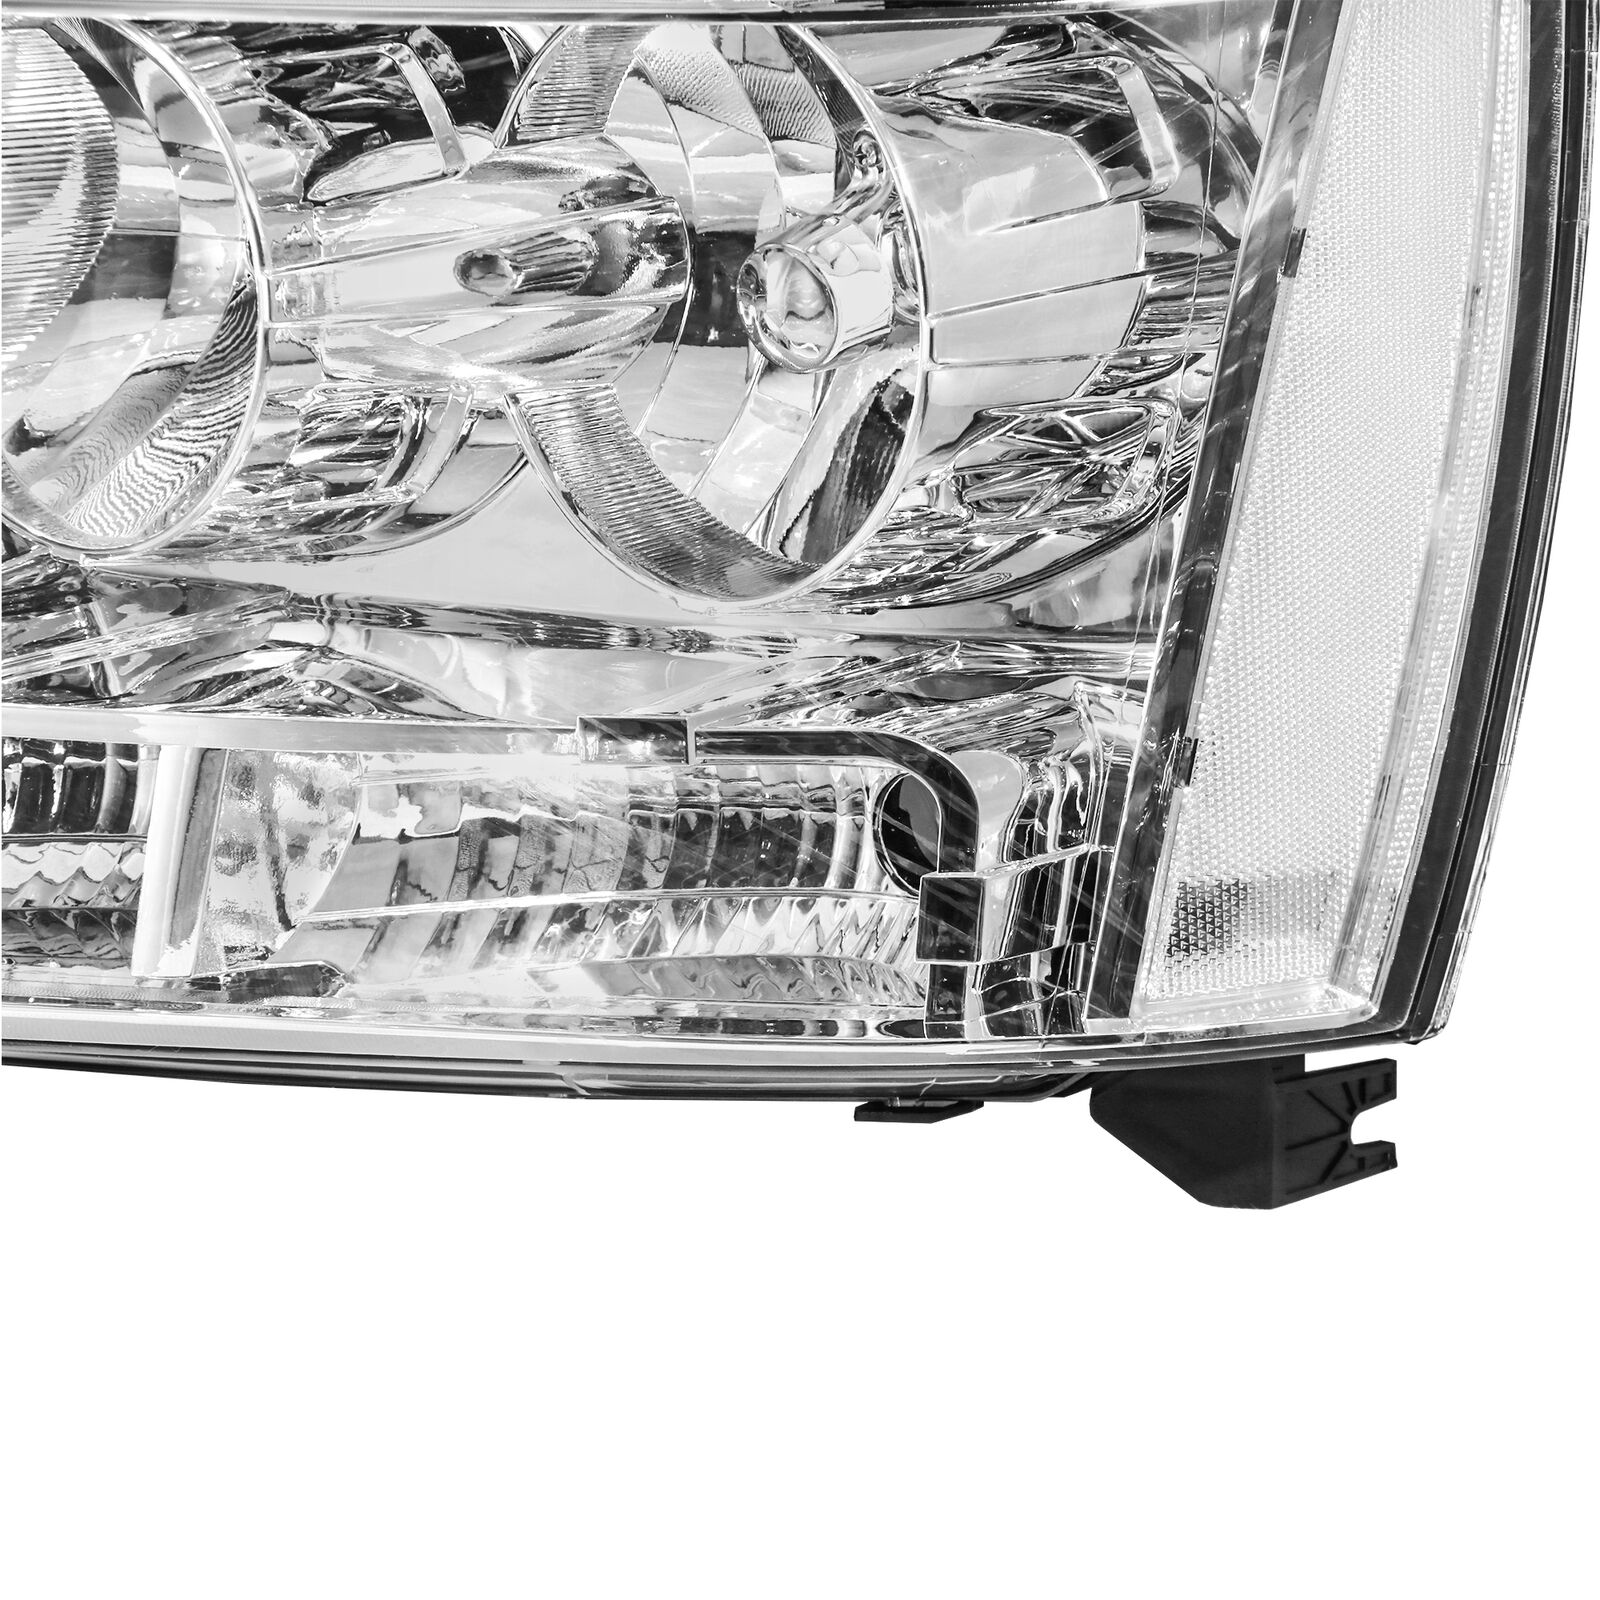 Headlights Assembly For 2007-2014 Chevy Tahoe Avalanche Suburban with Chrome Housing/Clear Lens/Clear Reflector